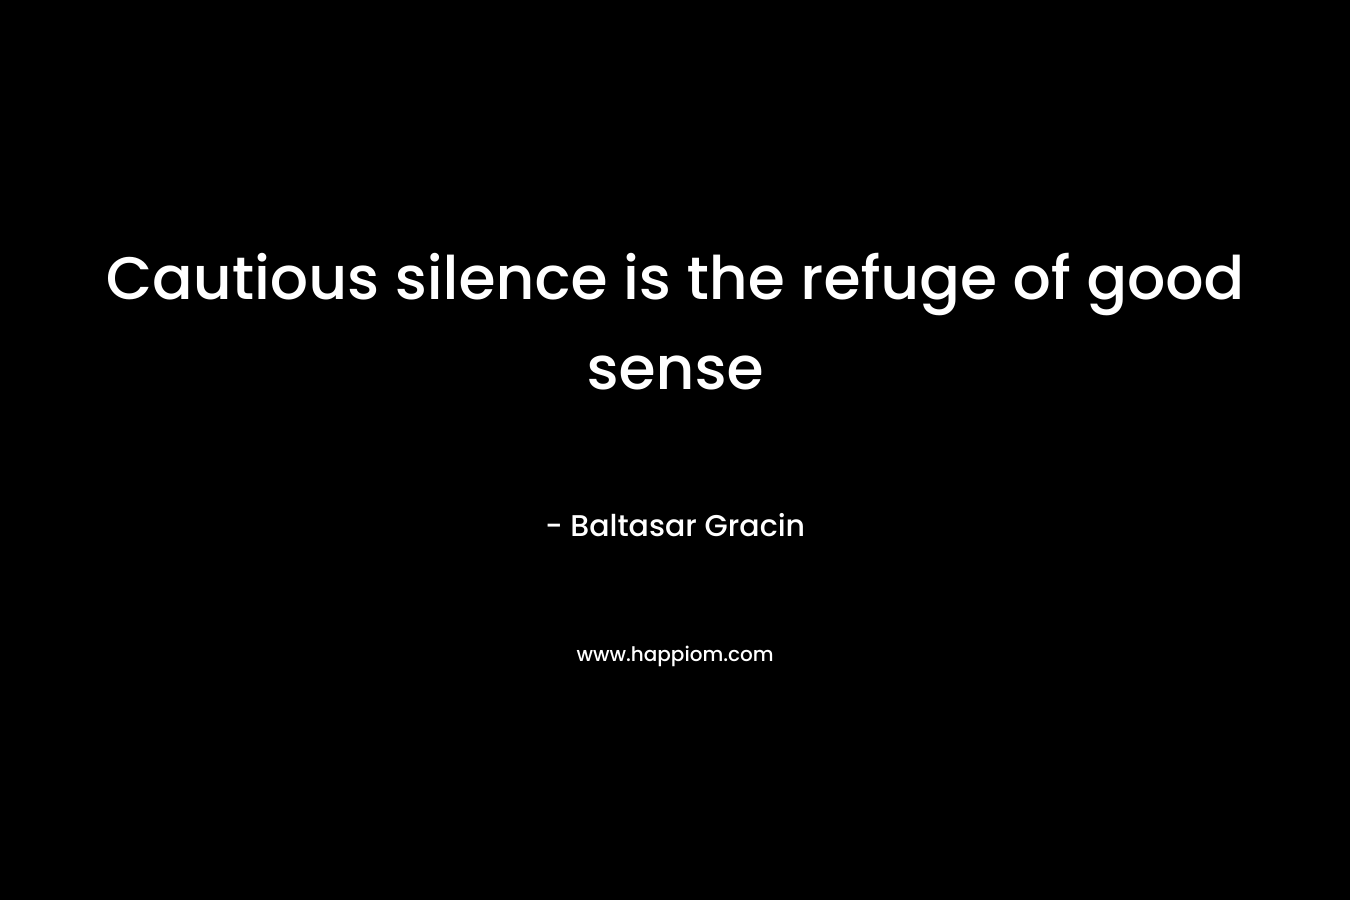 Cautious silence is the refuge of good sense